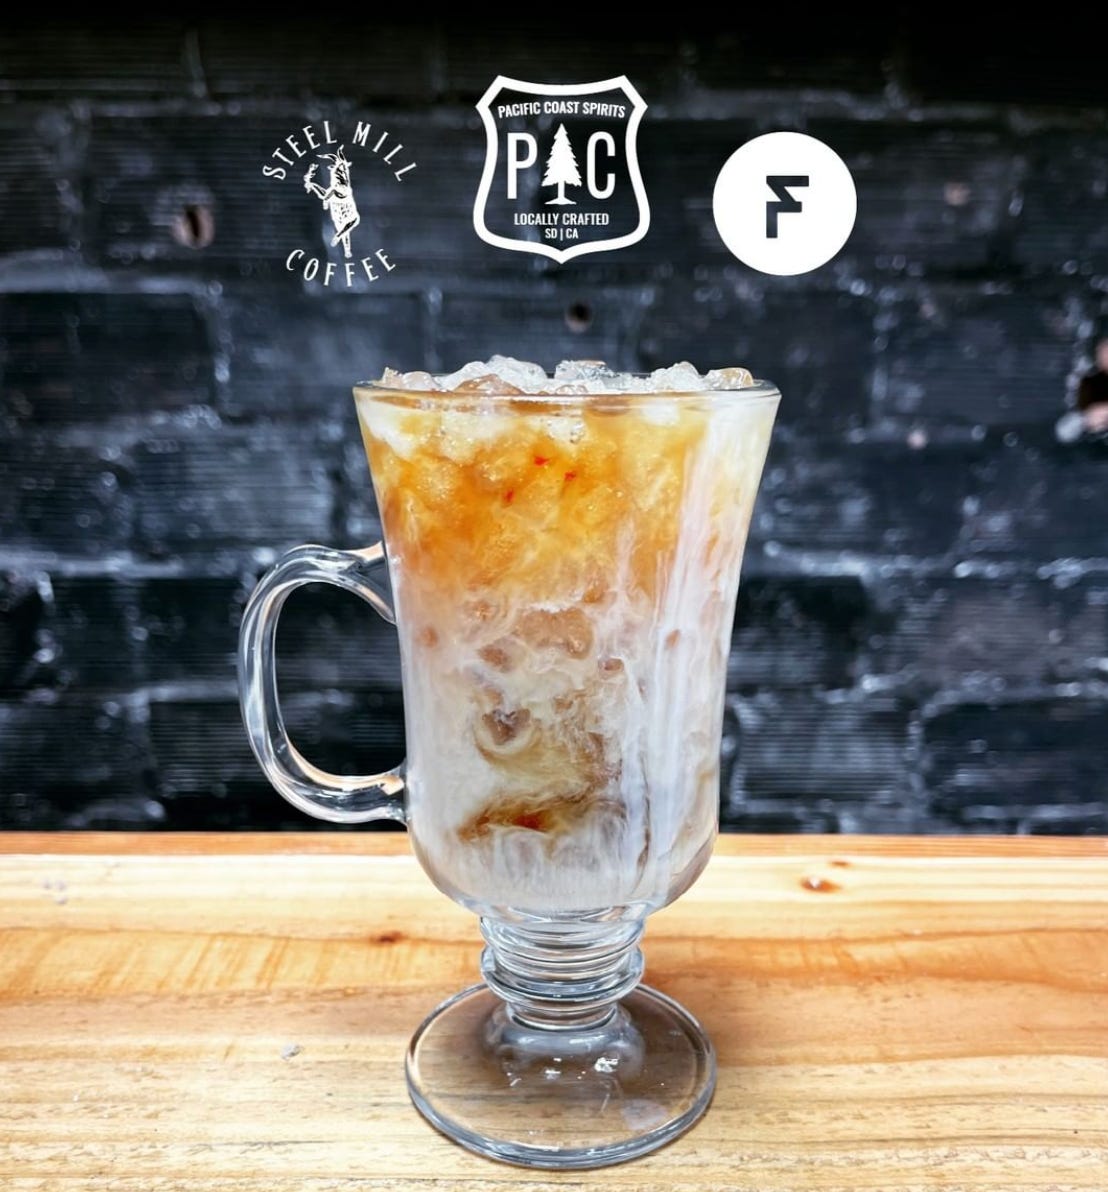 A tall, clear glass coffee cocktail with blended coffee and whiskey and cream on ice. The glass is on a wooden bar top in front of a black painted brick wall.